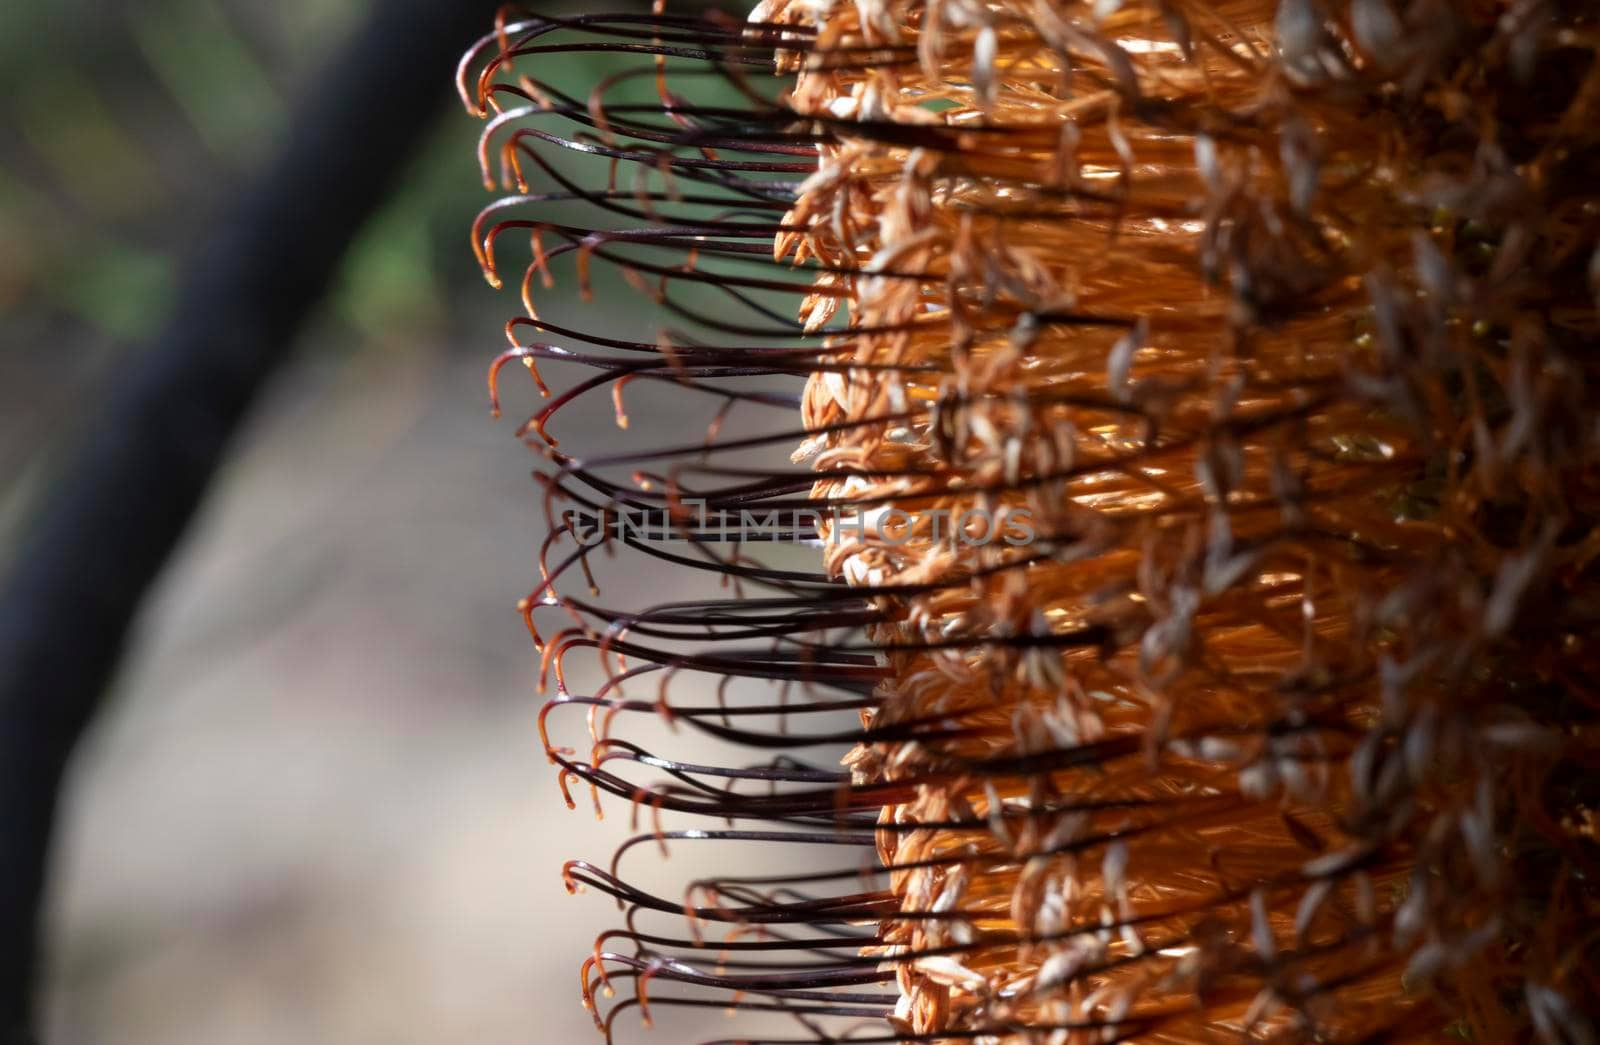 Photograph of a Banksia flower sprouting after bushfires in regional Australia by WittkePhotos